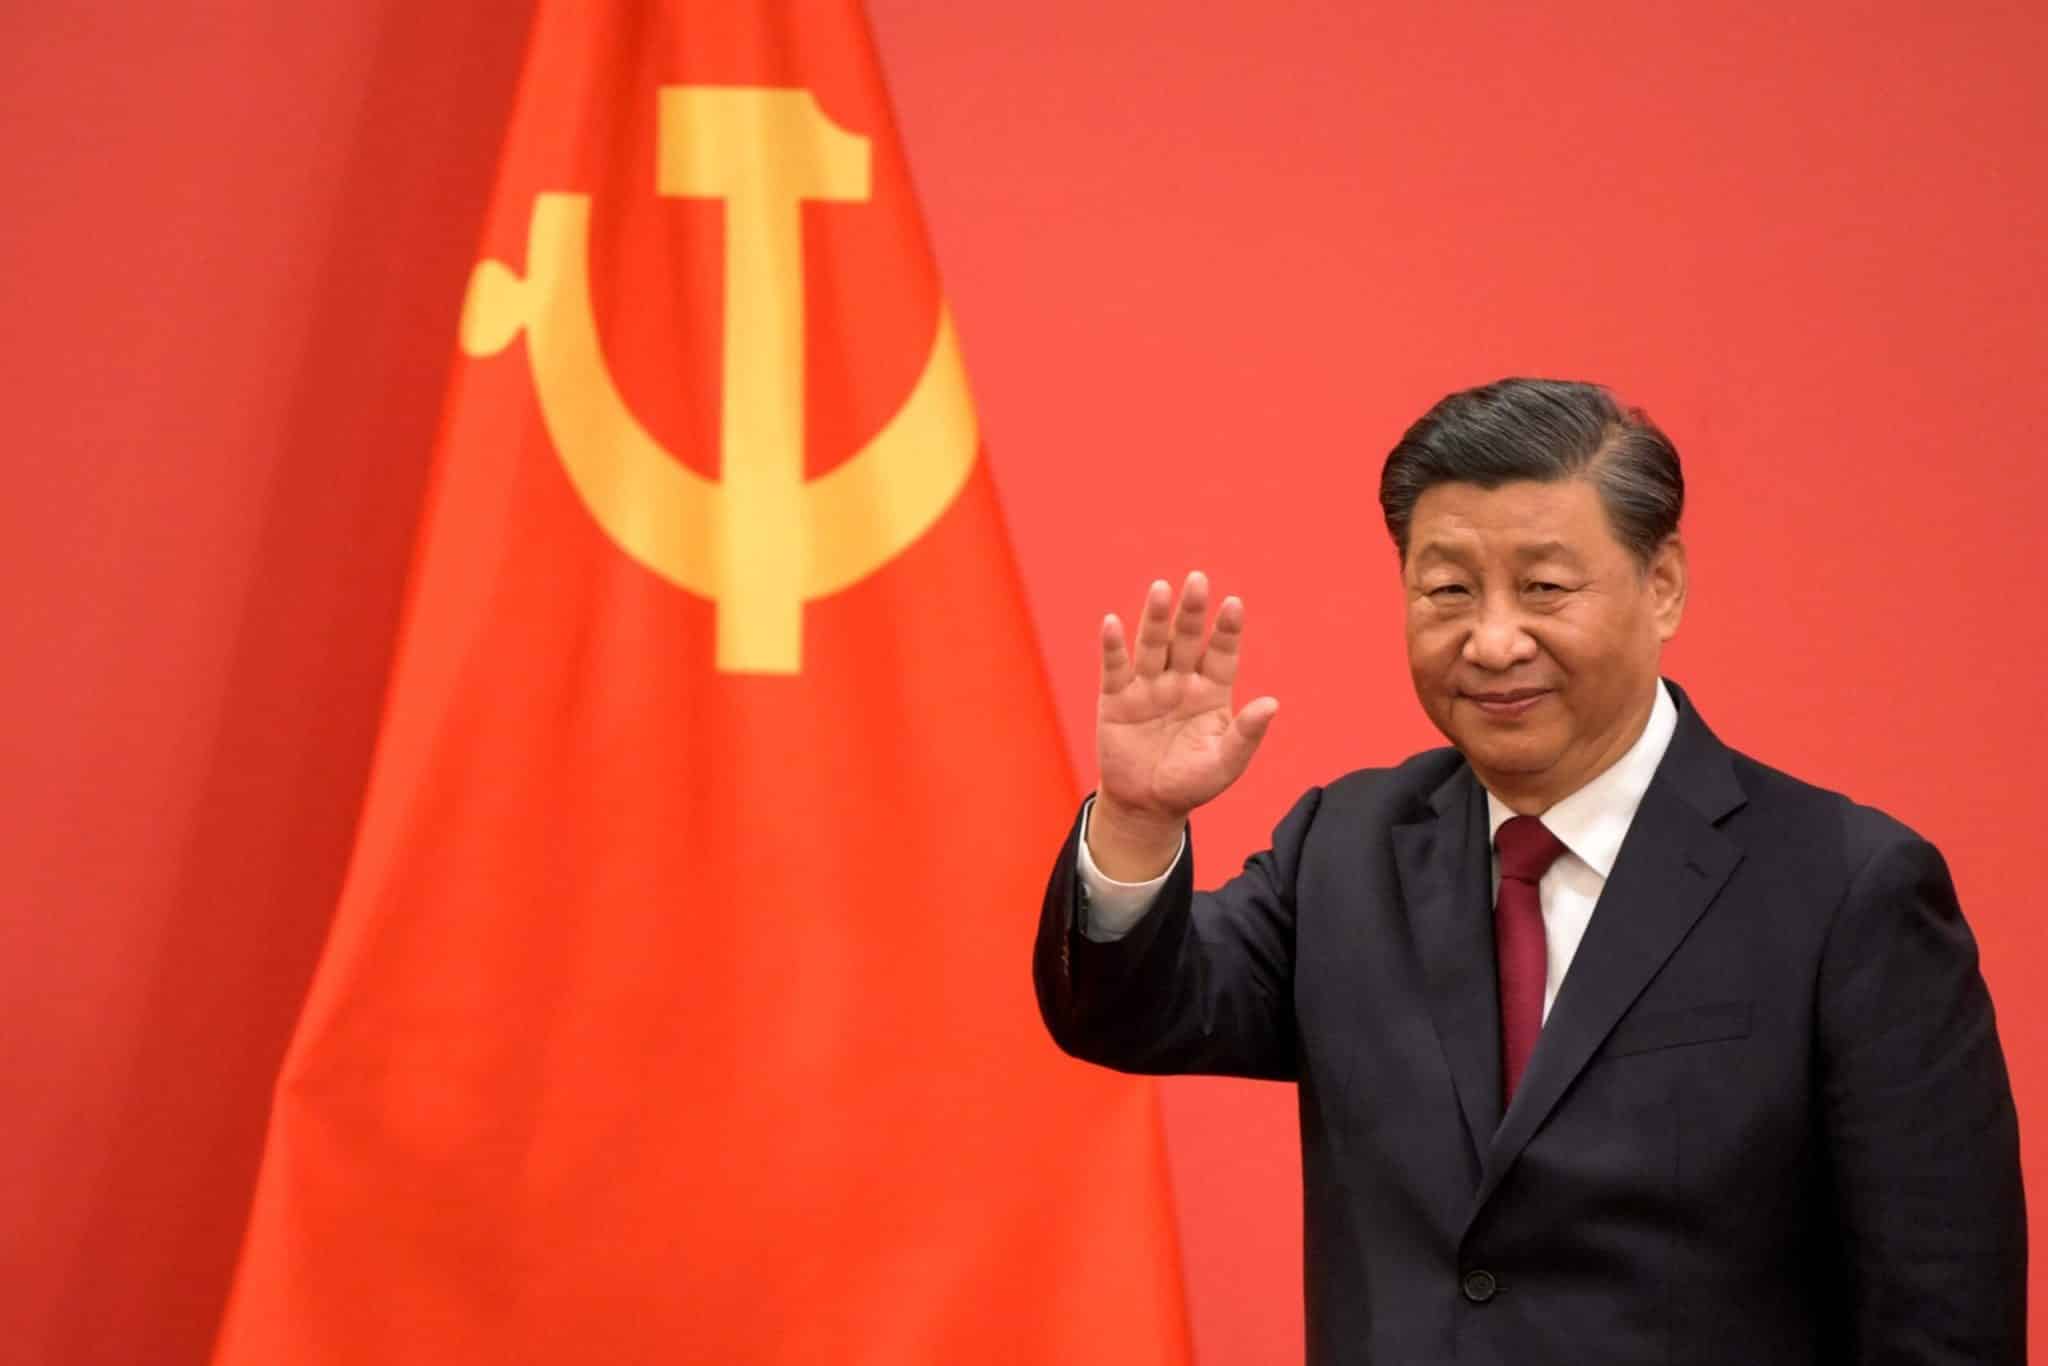 China's Xi Jinping says willing to work with United States for mutual benefit